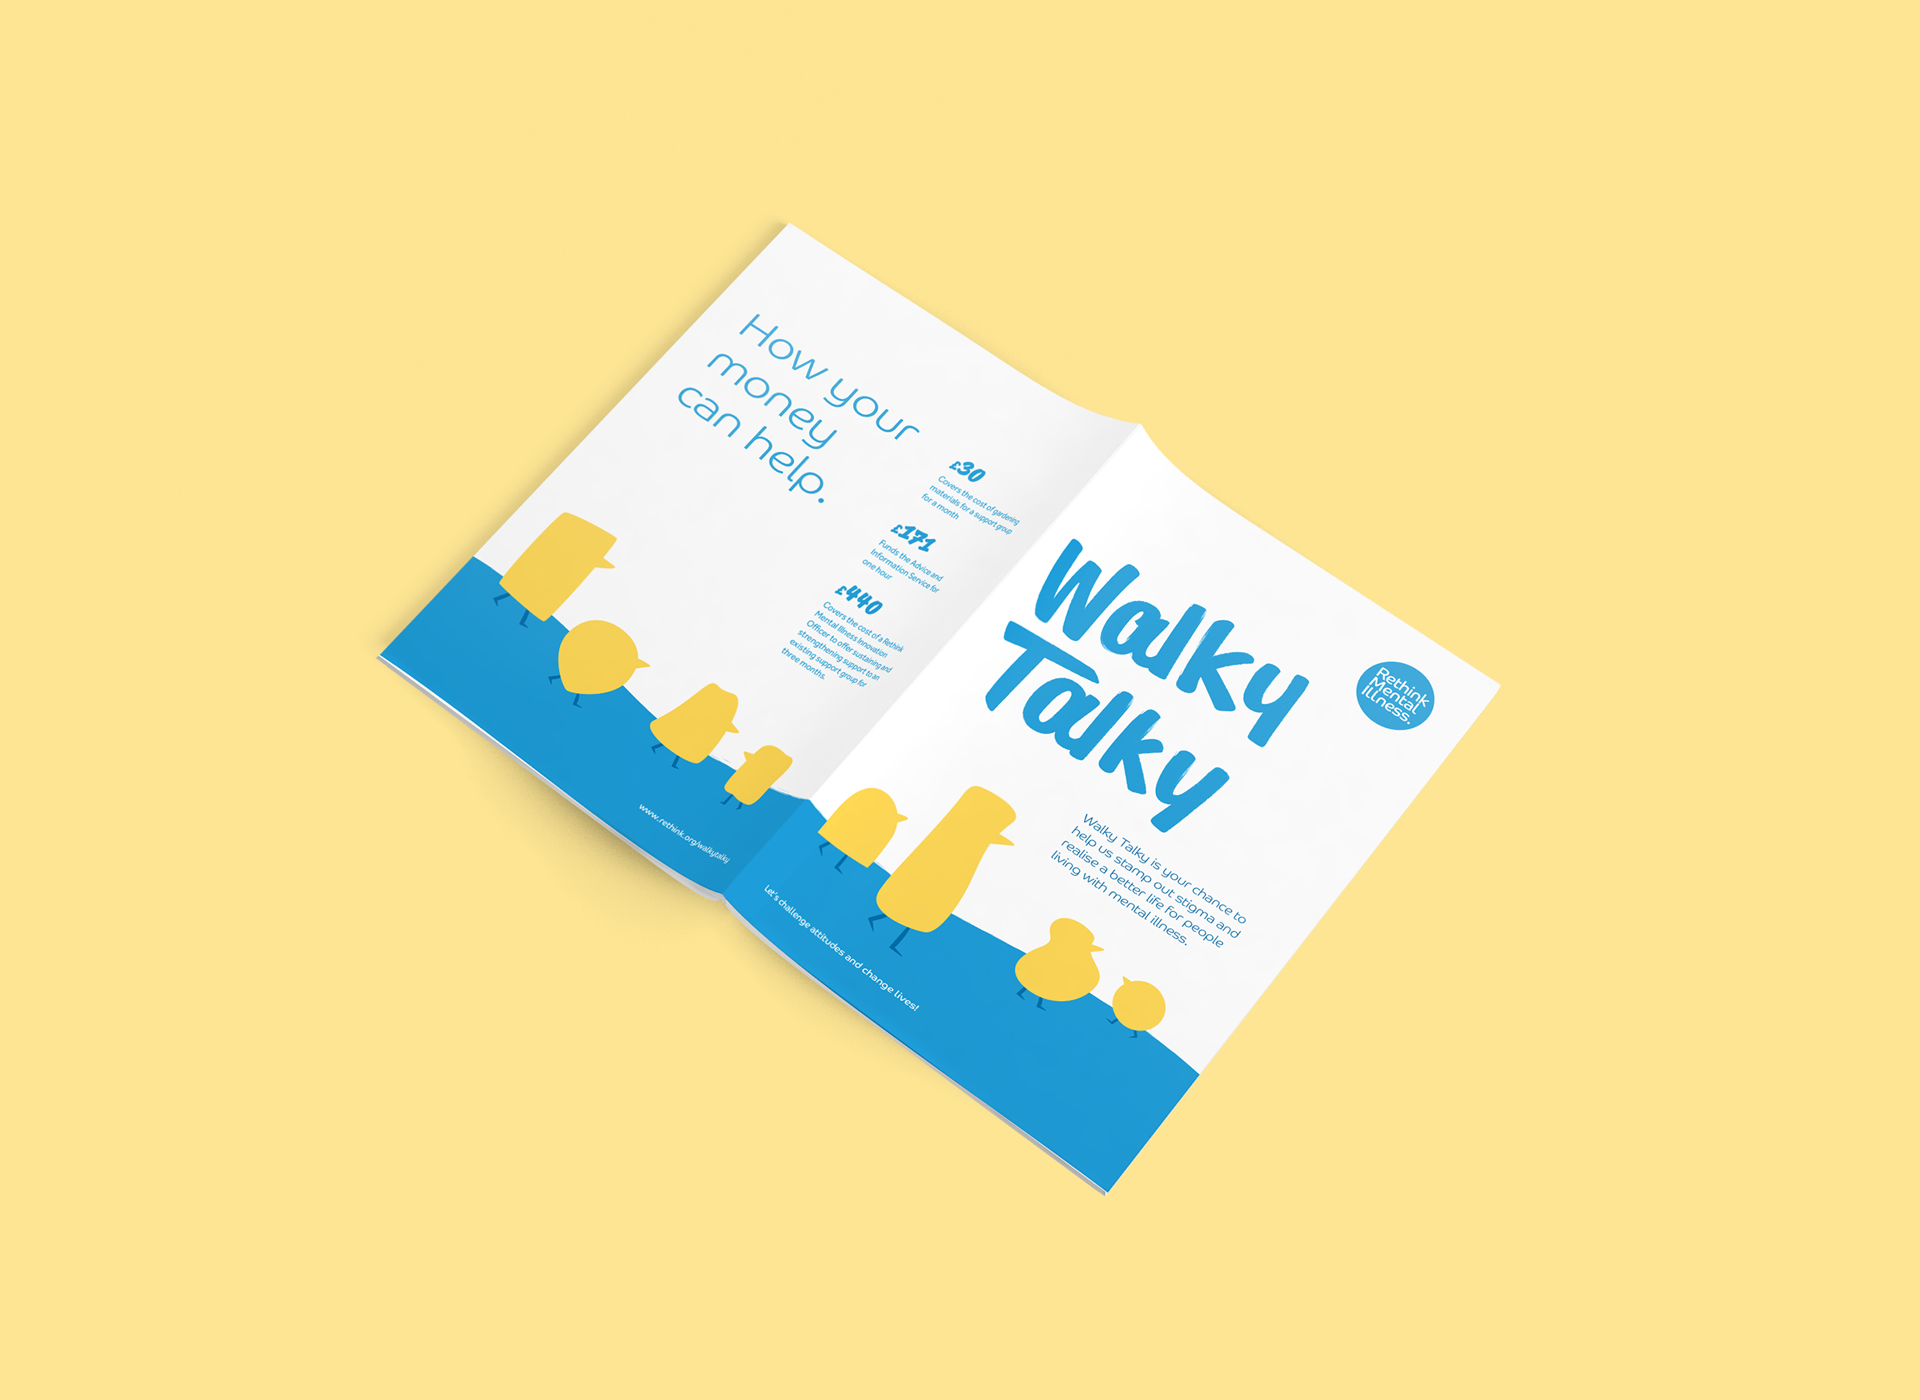 Walky Talky fundraising guide booklet design